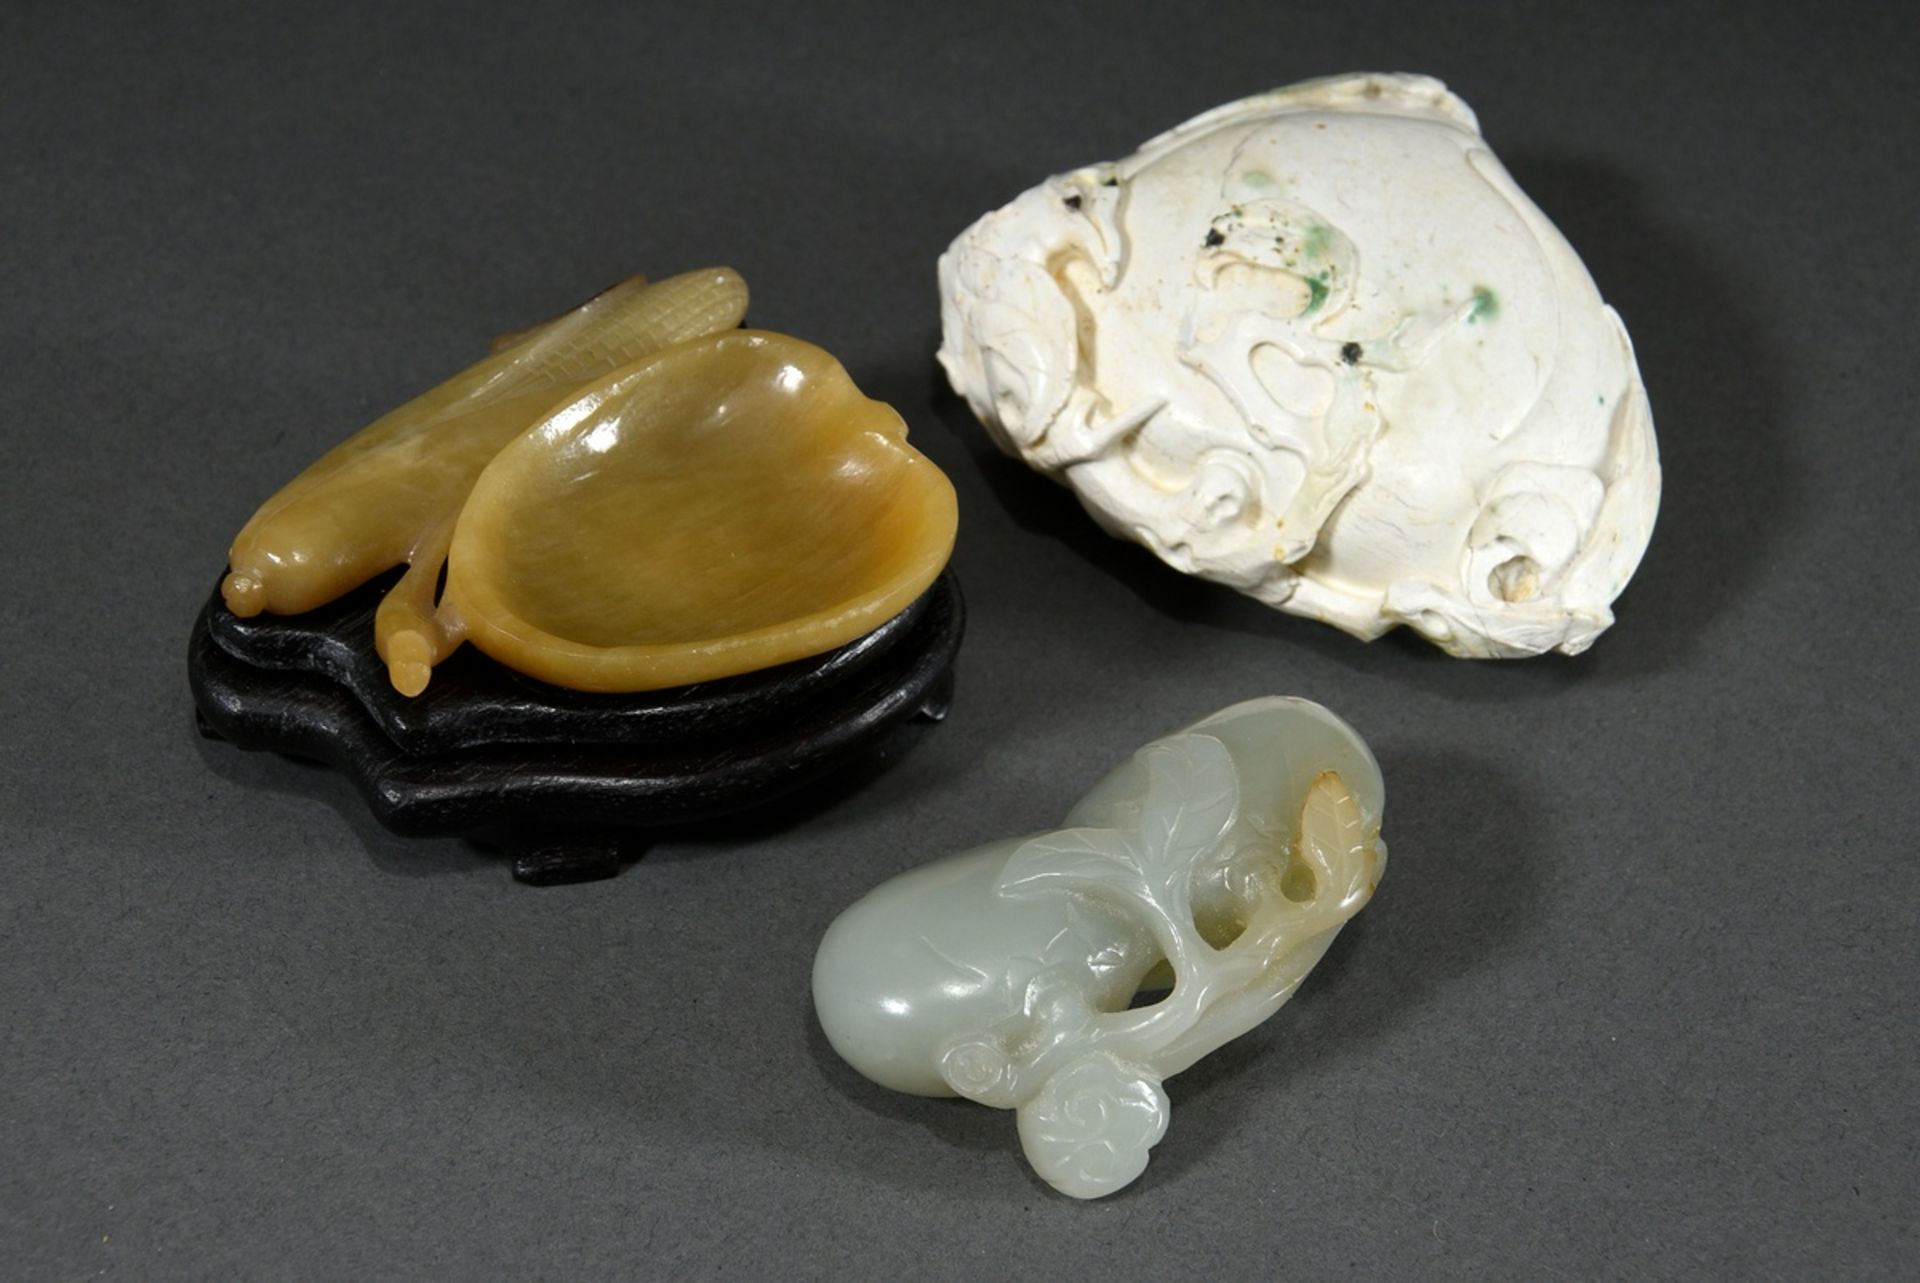 3 Various stone carvings: beige jade brush wash "Pumpkin shell and corncob" on wooden base (7x5.5x1